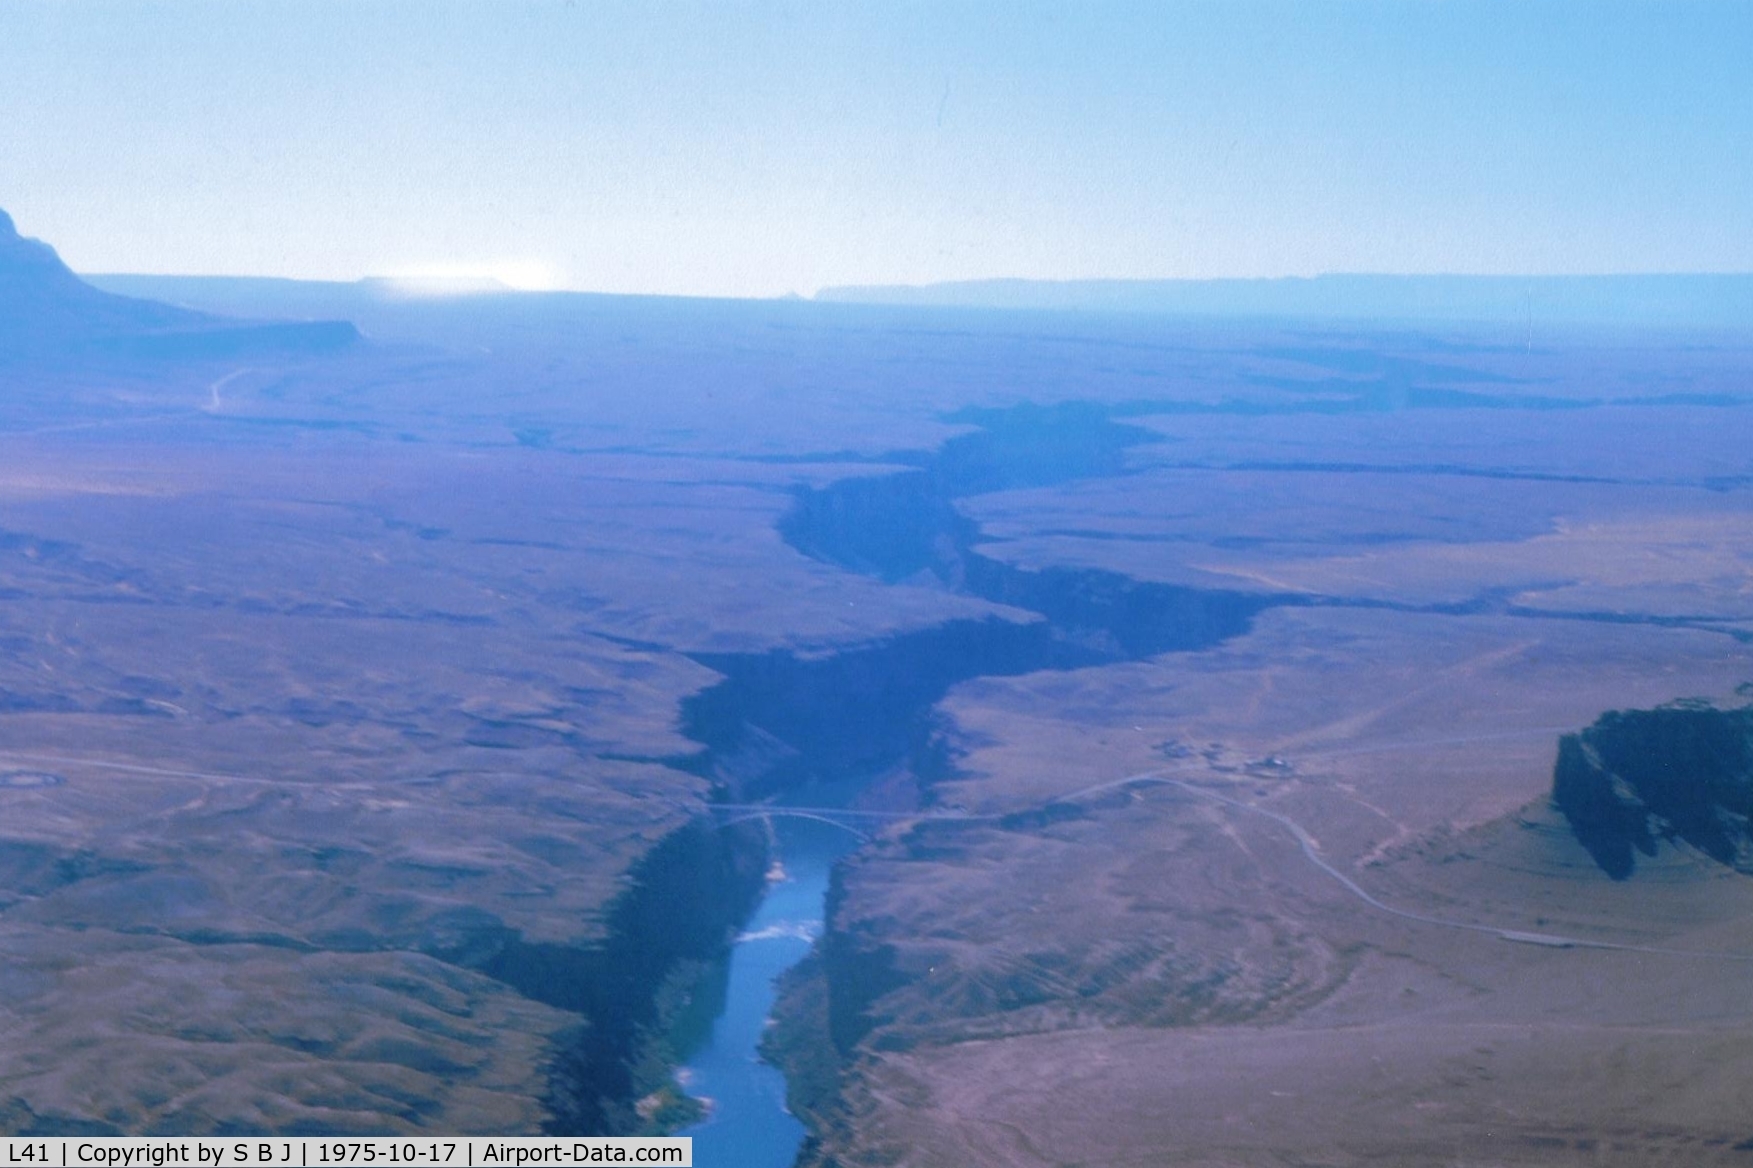 Marble Canyon Airport (L41) - Picture of Marble Canyon on a 1975 flight to the Grand Canyon.L41 was still a dirt runway then.View is to the SW and to the Grand Canyon.